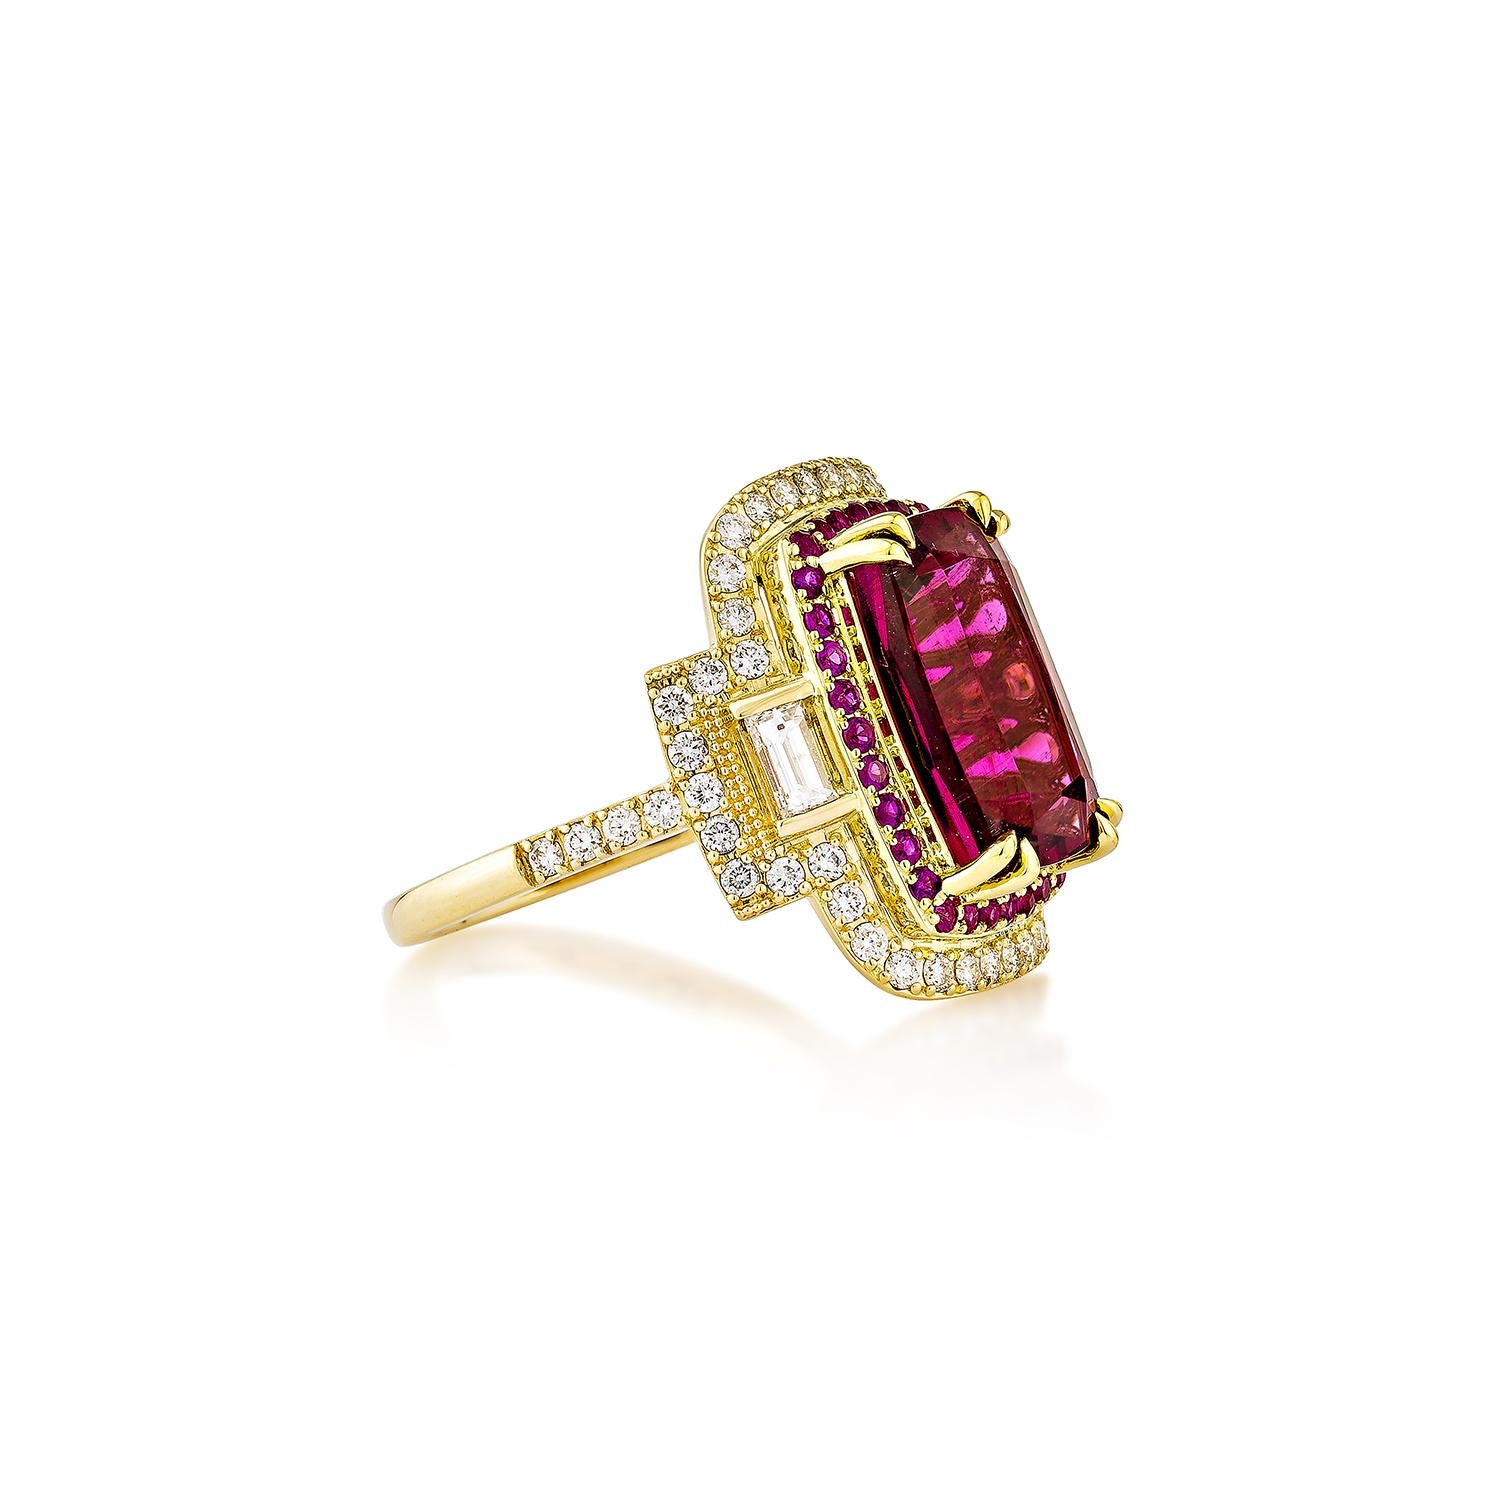 Sunita Nahata showcases an exquisite diamond studded Rubellite Ring that exudes grace and elegance. This exquisite 18Karat yellow gold Ring is ideal for any special occasion because it combines traditional elegance with modern flair.

Rubellite